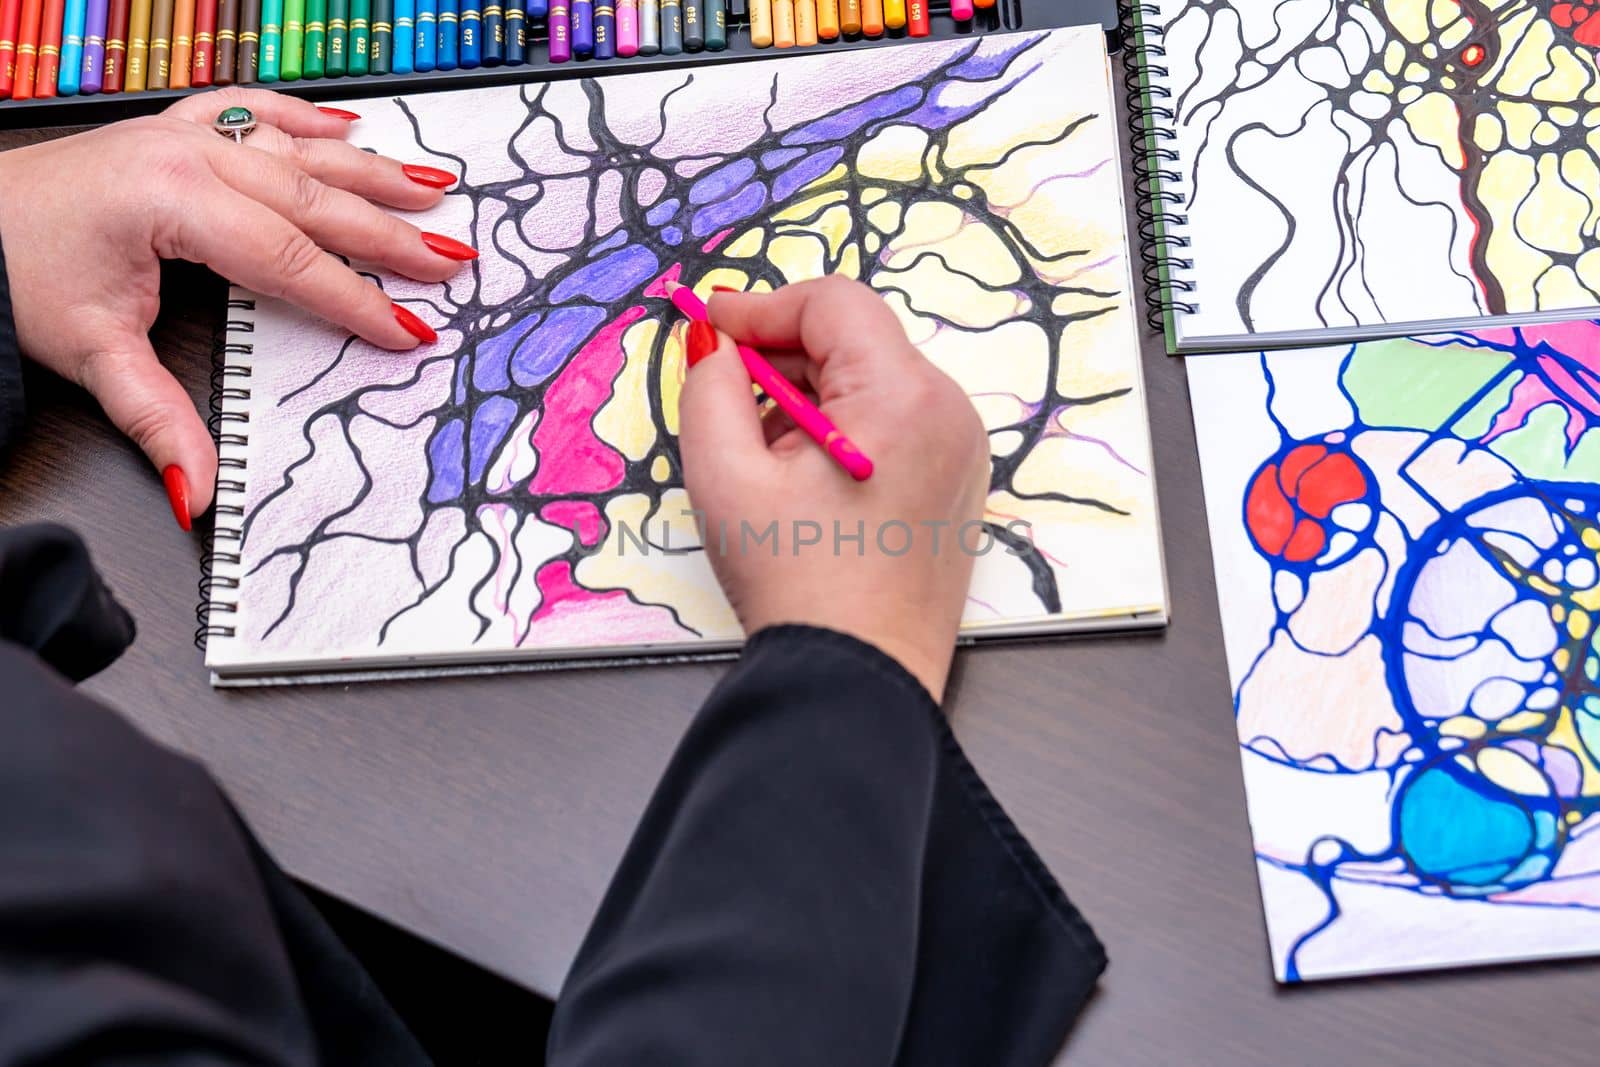 drawing neurographics with colored pencils on paper by Edophoto